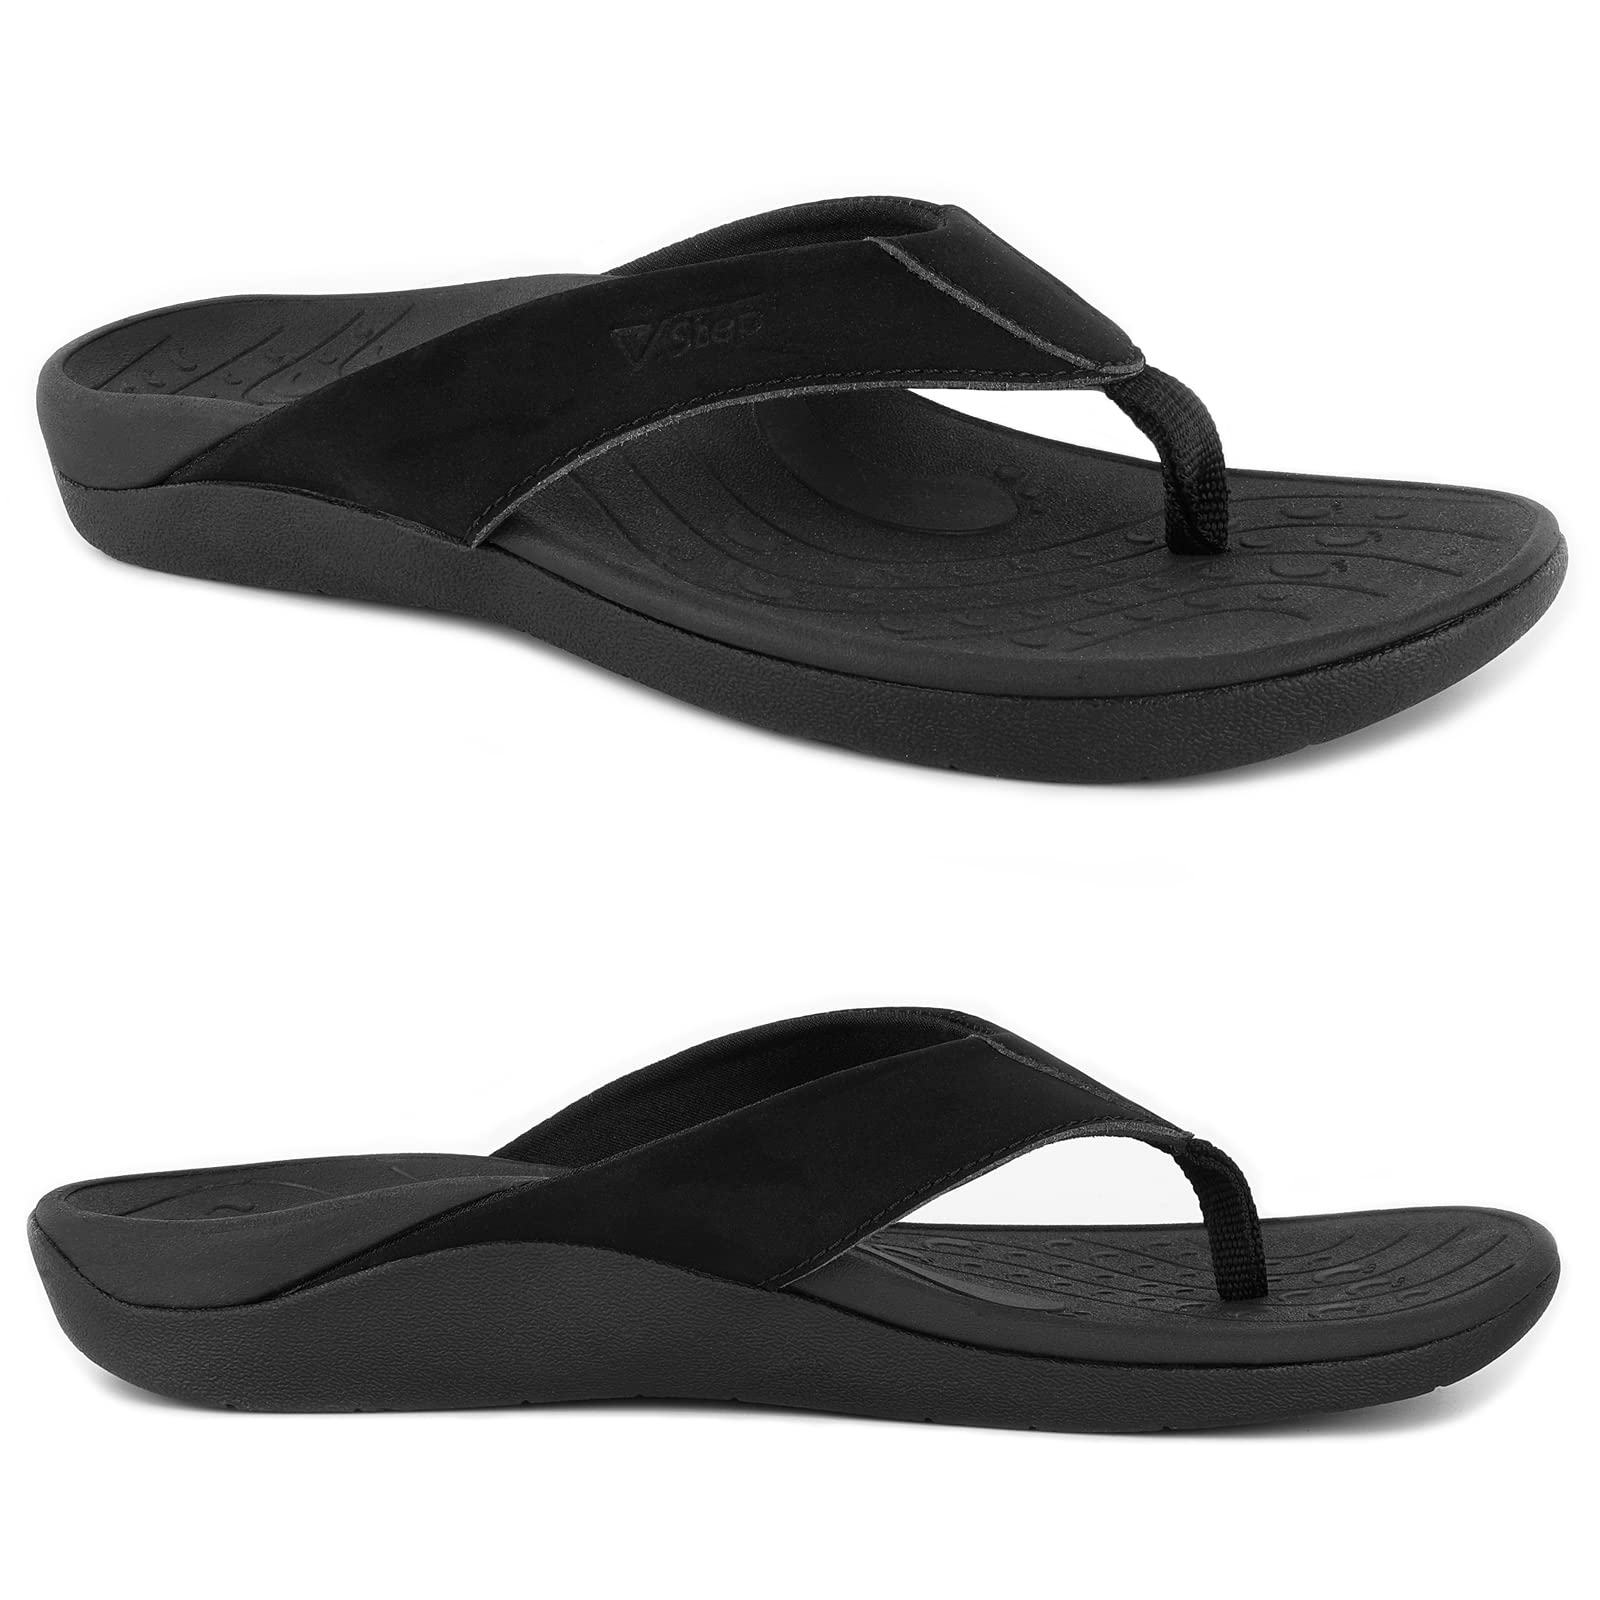 Arch Support Flip-Flops for Men and Women